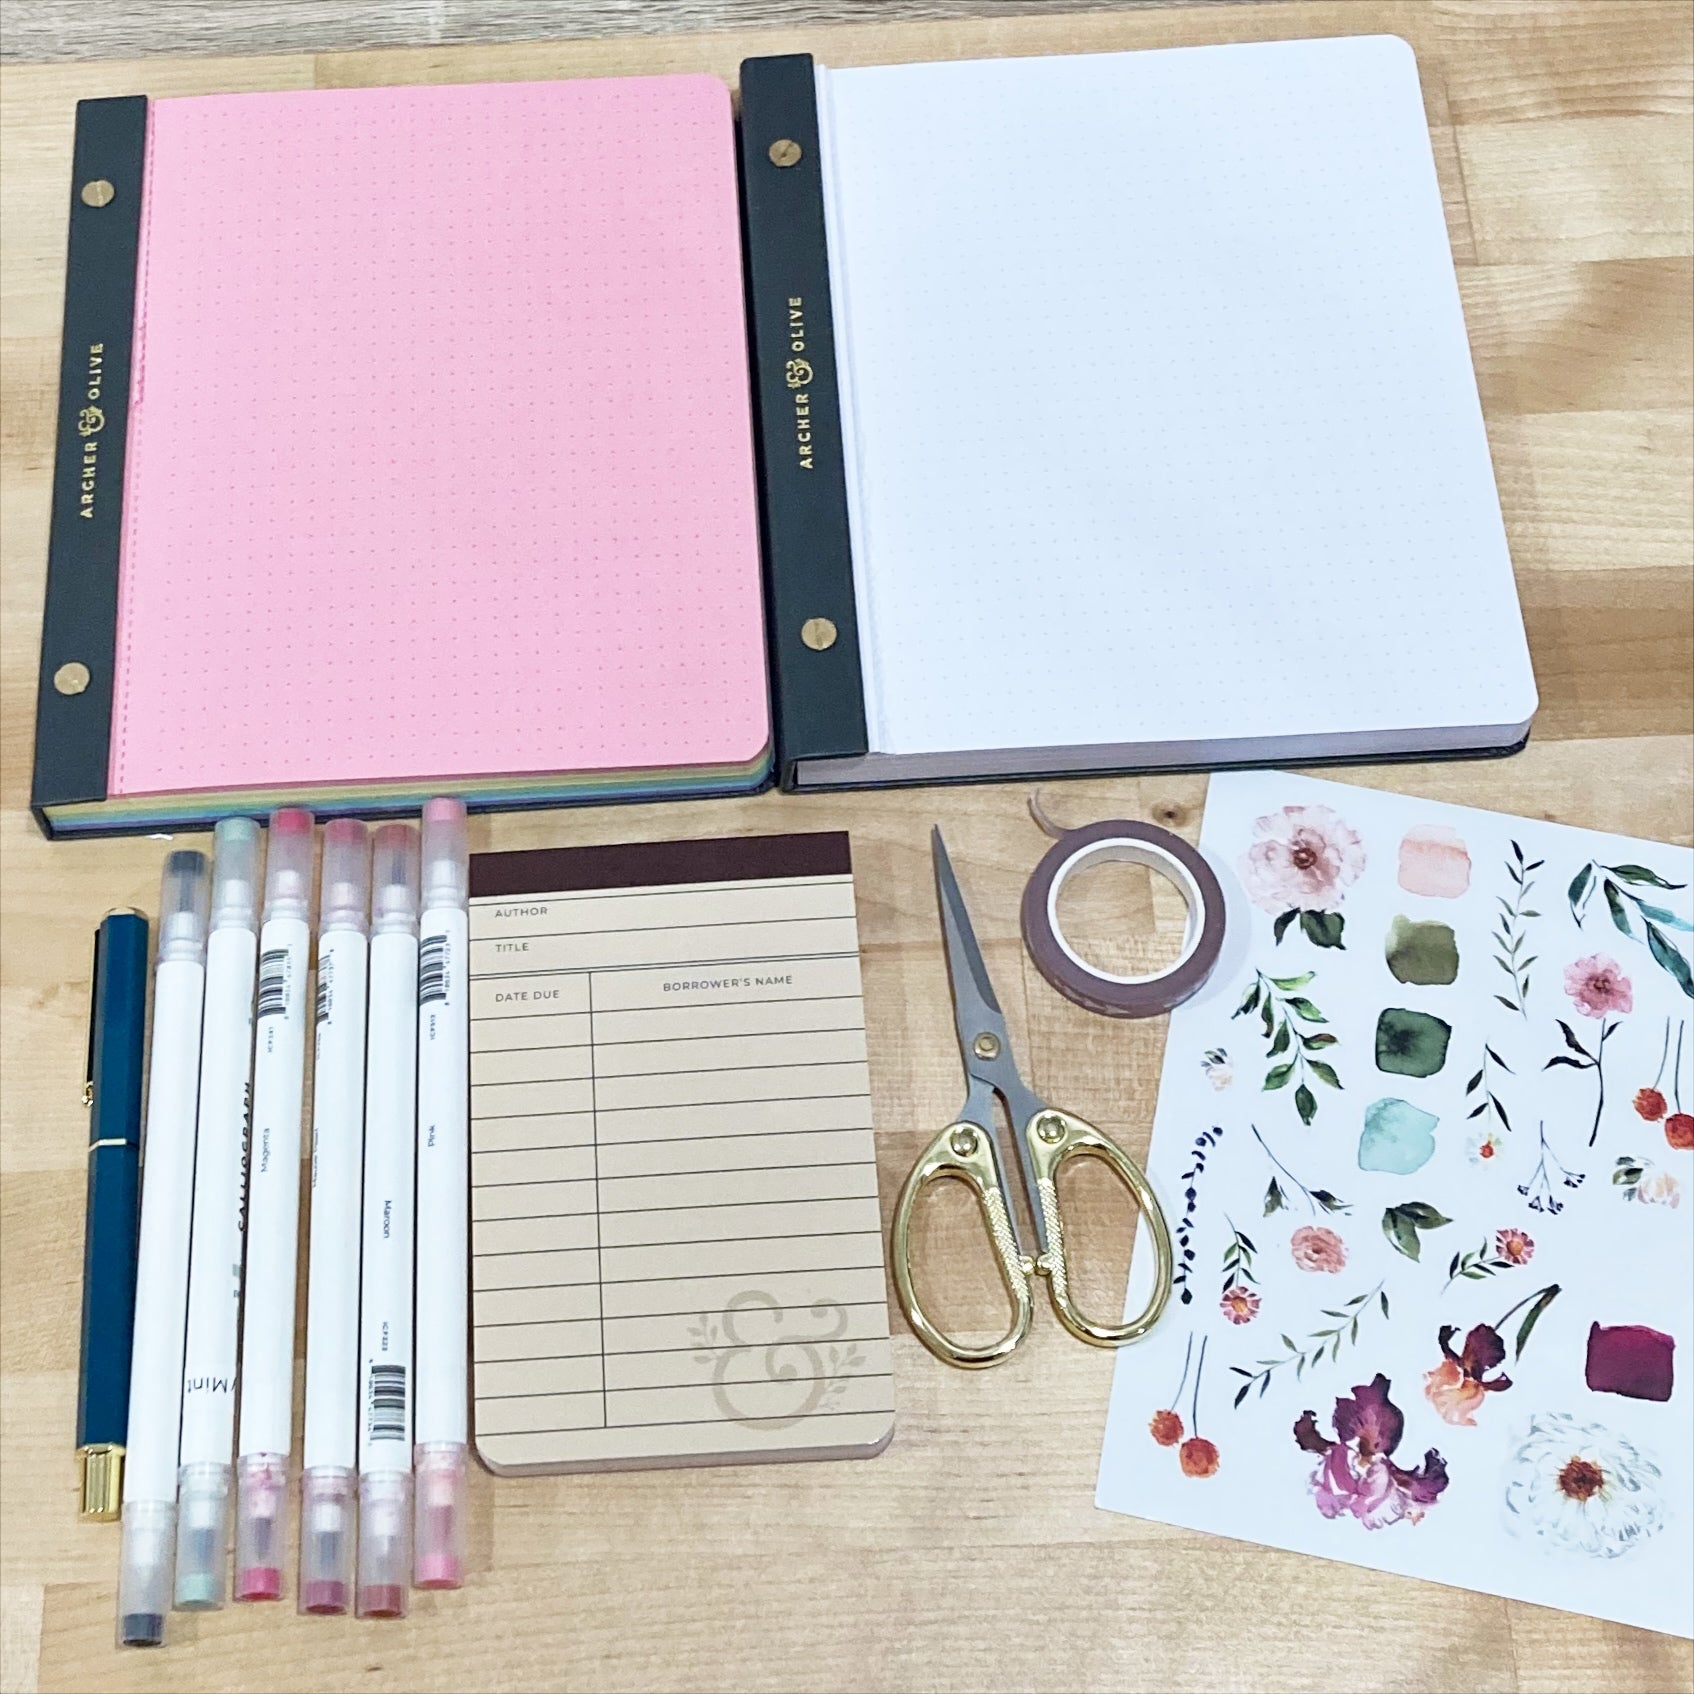 Paper pads, calliographs, scissors, washi, and stickers used in this project.